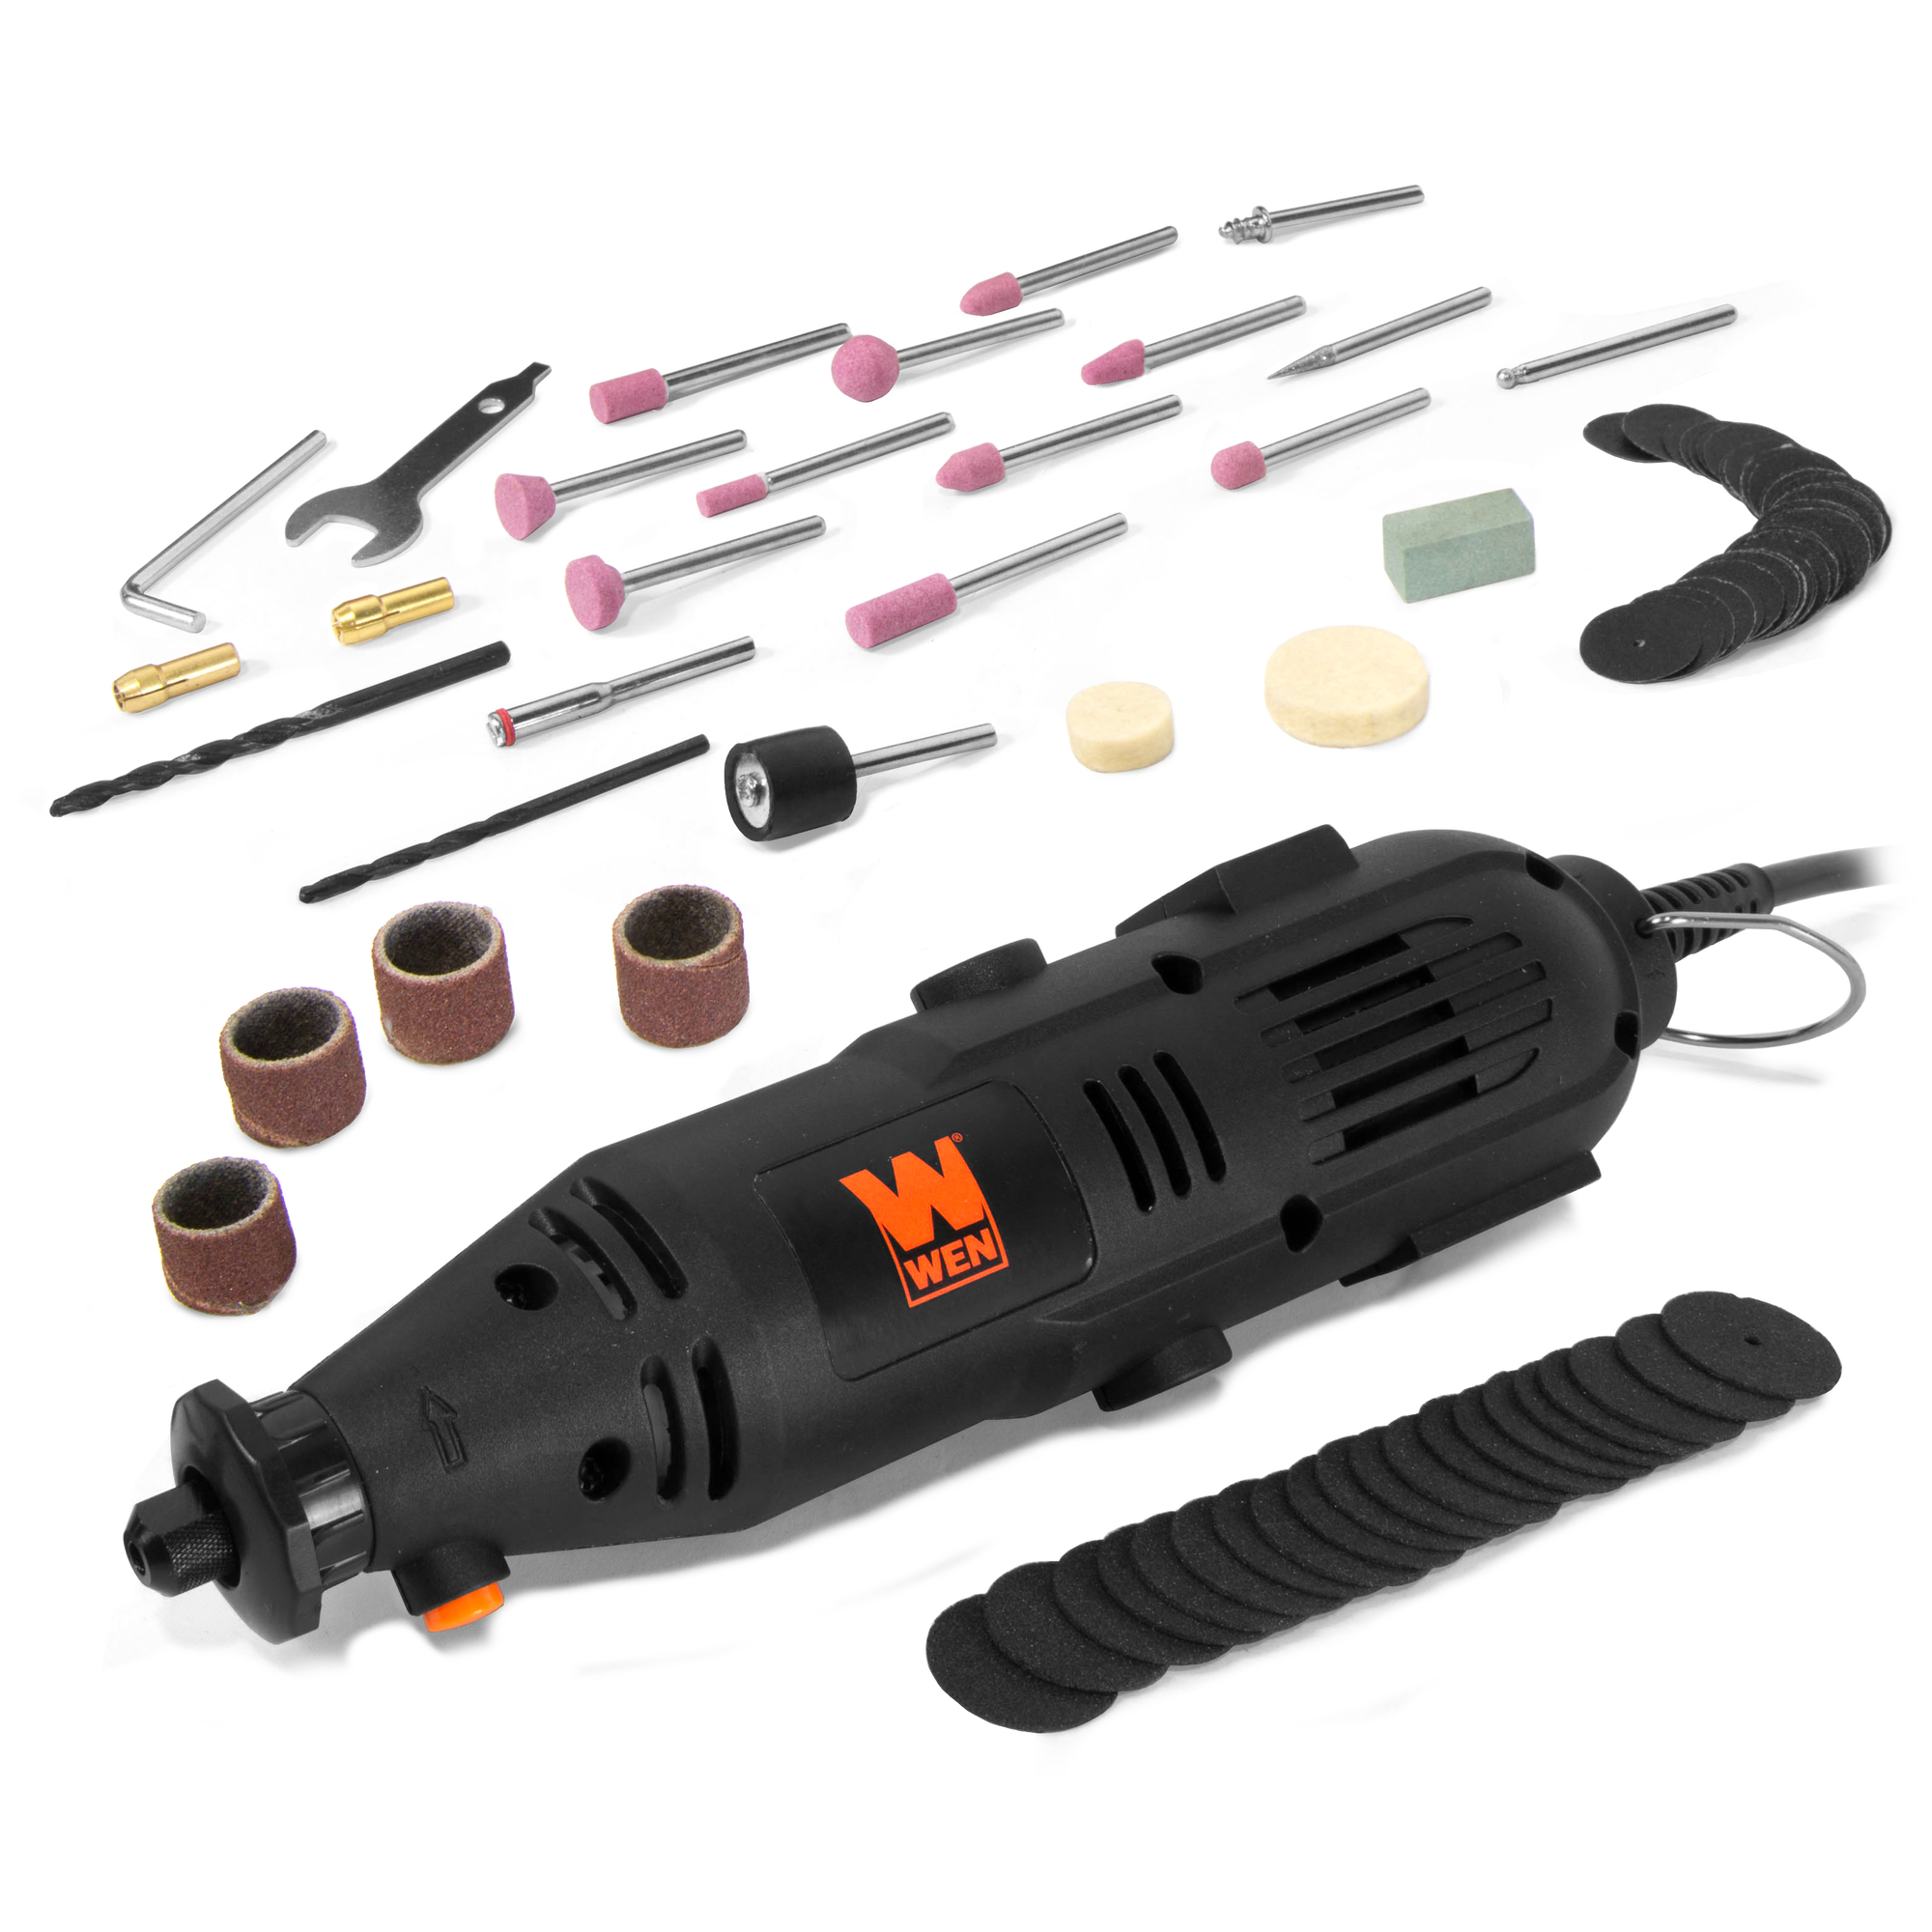 WEN, 1-Amp Variable Speed Rotary Tool w/ 100+ Pcs, Max. Speed 32000 rpm, Amps 1 Volts 120 Model 23101